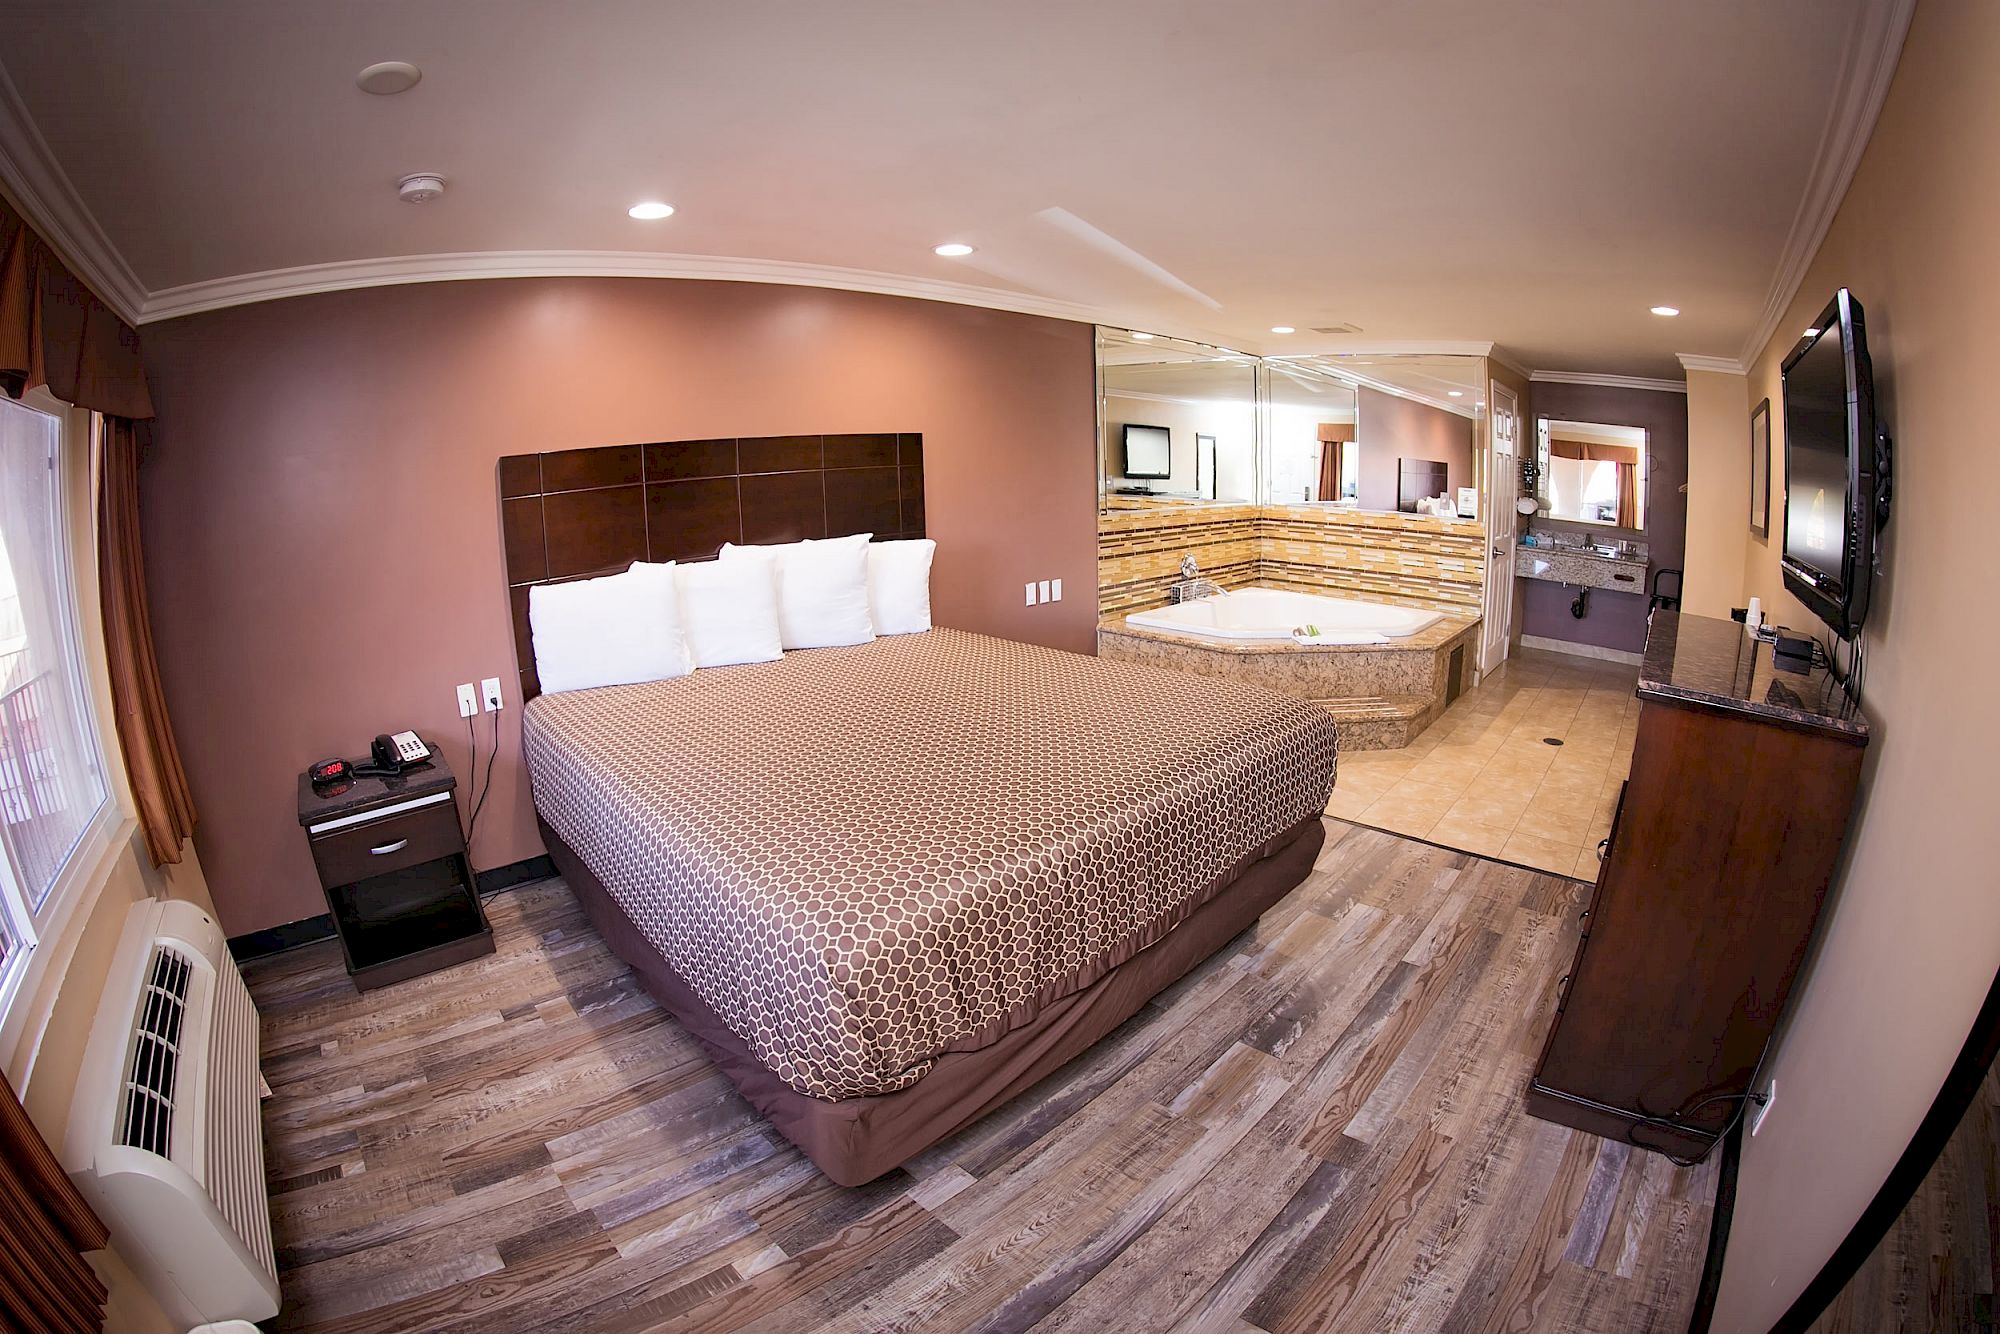 A hotel room with a large bed, bedside table, TV, air conditioner, large mirrors, and a Jacuzzi in the corner, featuring a wooden floor and warm lighting.